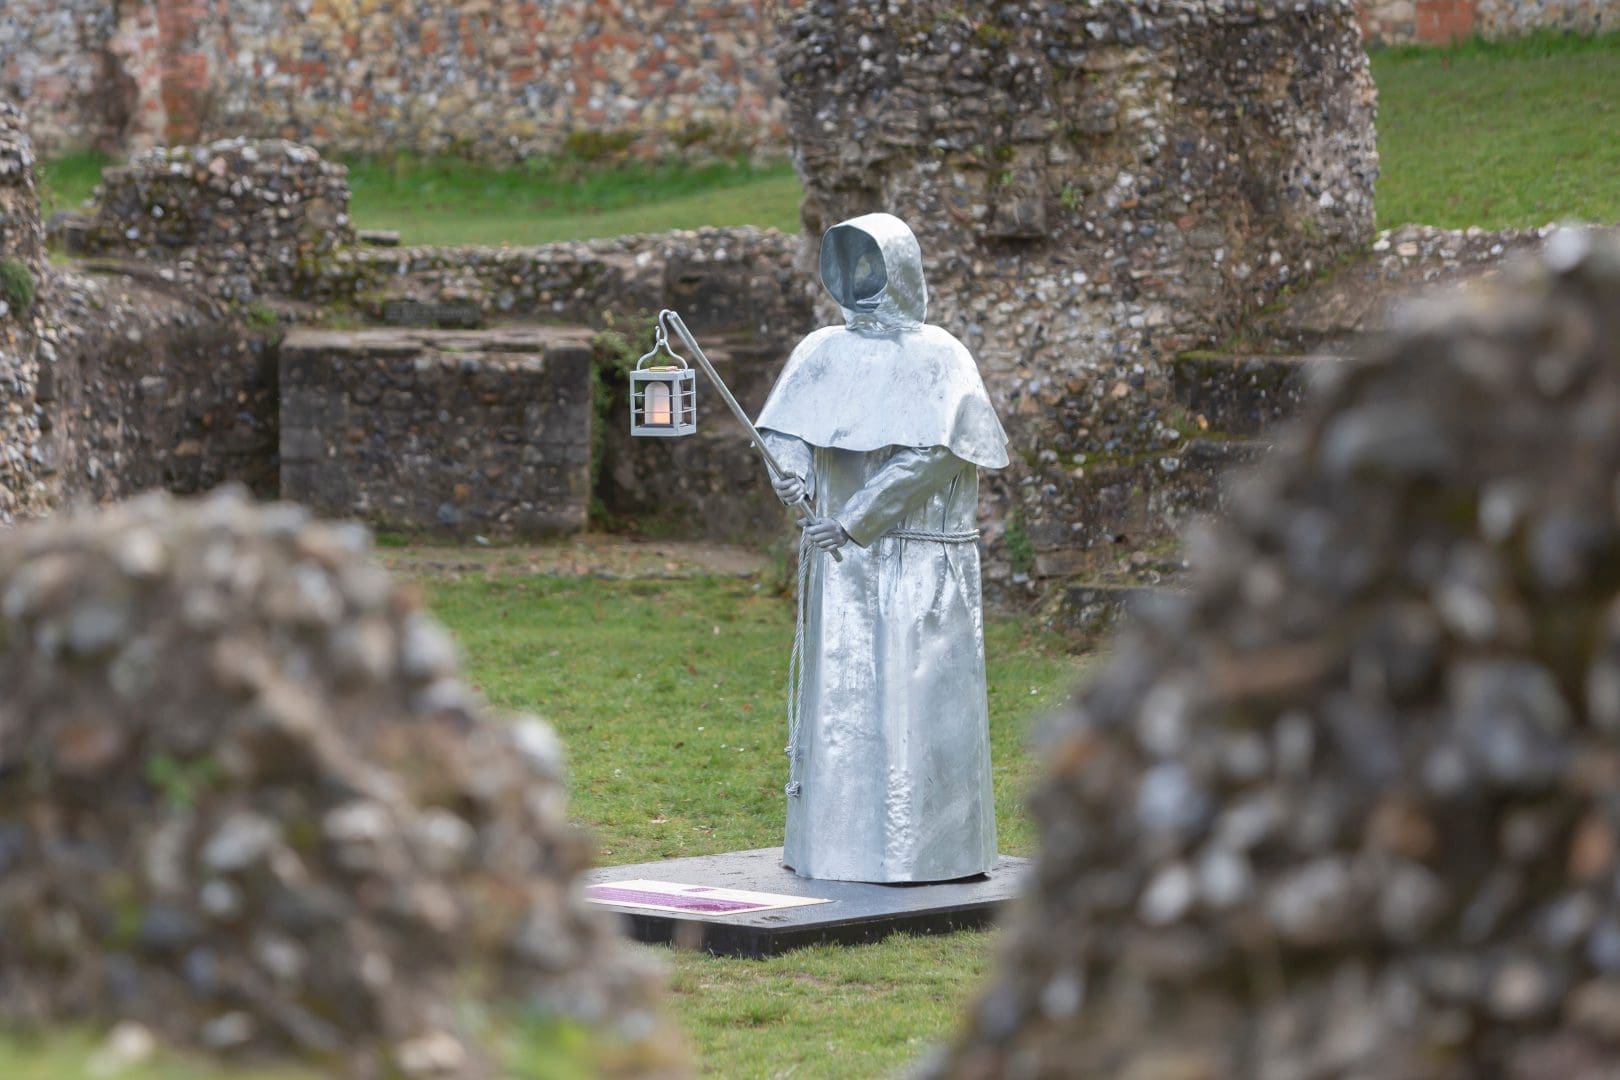 Giant monk will be installed in the crypt of the Abbey of St Edmund during May to launch the monthly changing sculpture exhibition (credit Phil Morley)